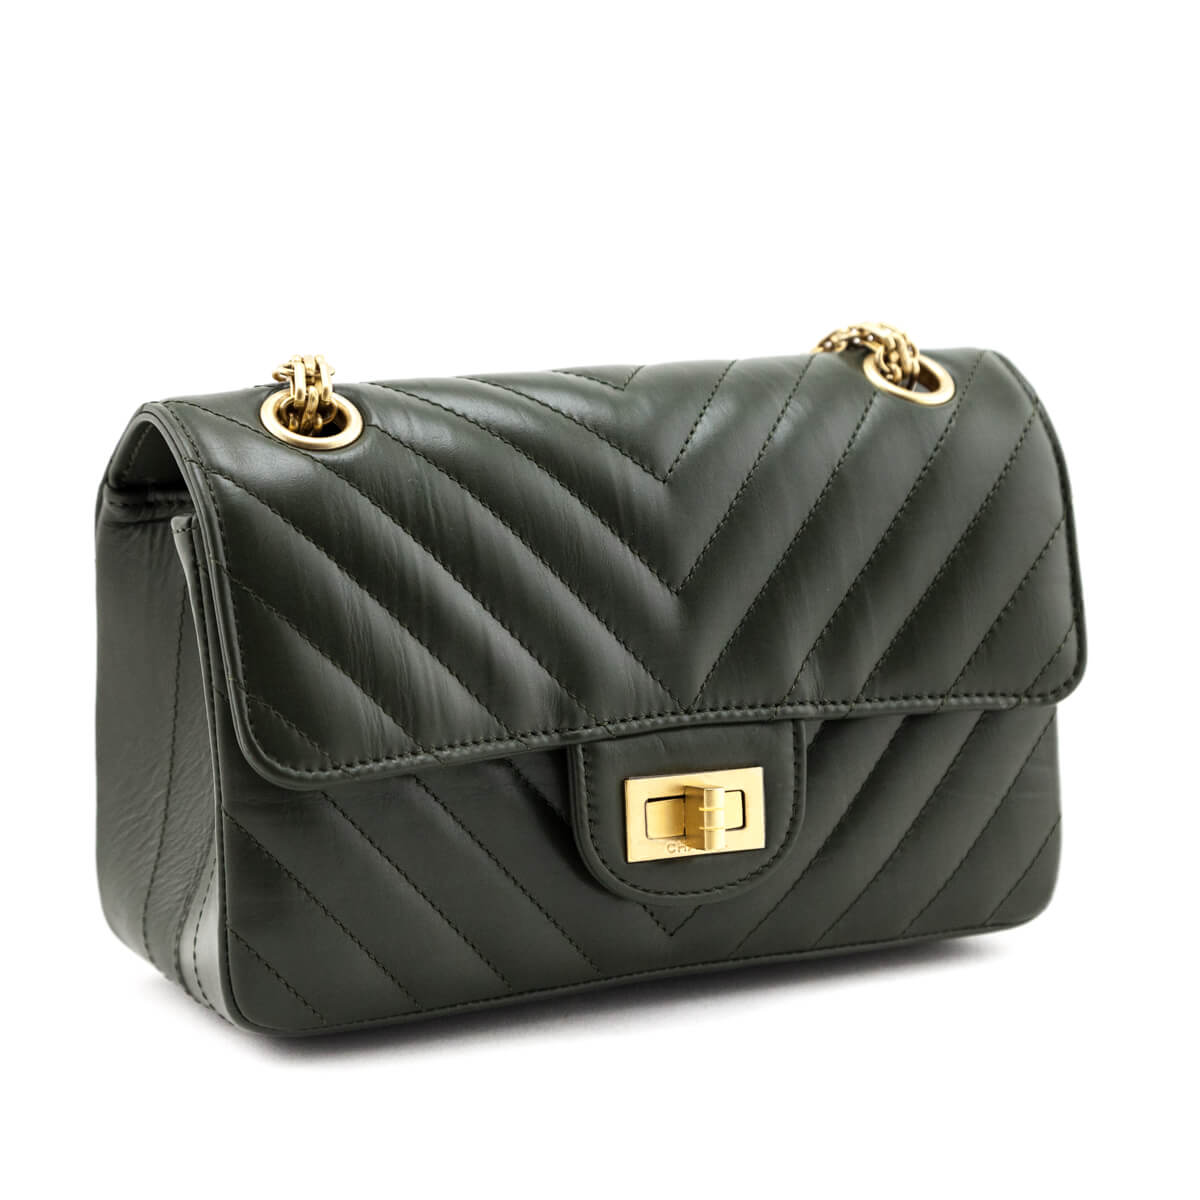 Chanel Green Quilted Aged Calfskin Chevron Mini Reissue Flap Bag - Love that Bag etc - Preowned Authentic Designer Handbags & Preloved Fashions